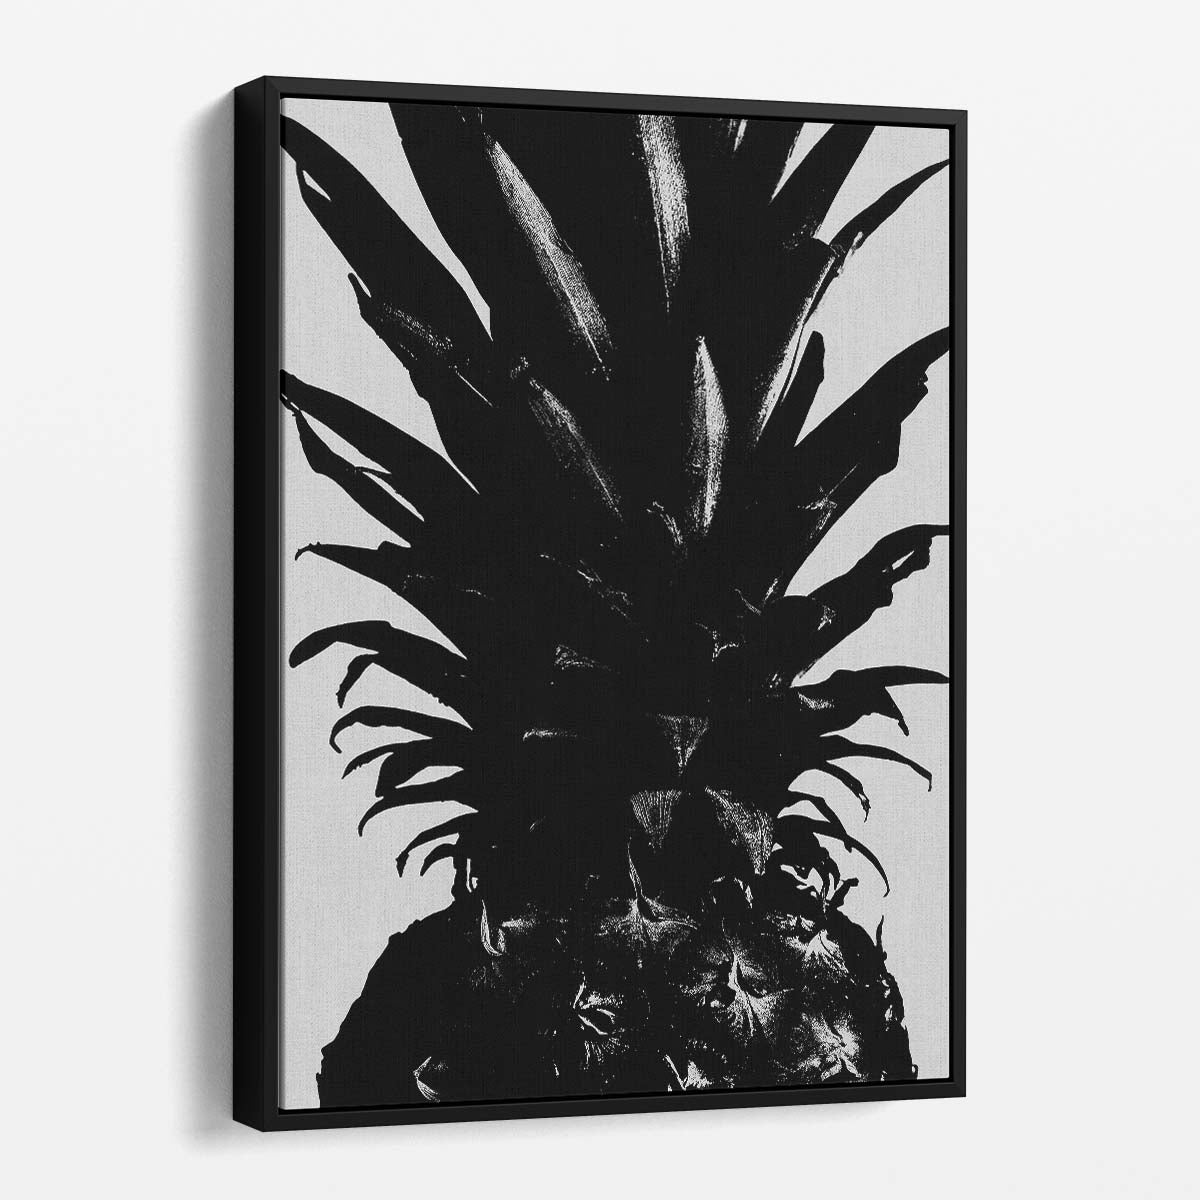 Minimalistic Black & White Pineapple Still Life Photography Art by Luxuriance Designs, made in USA